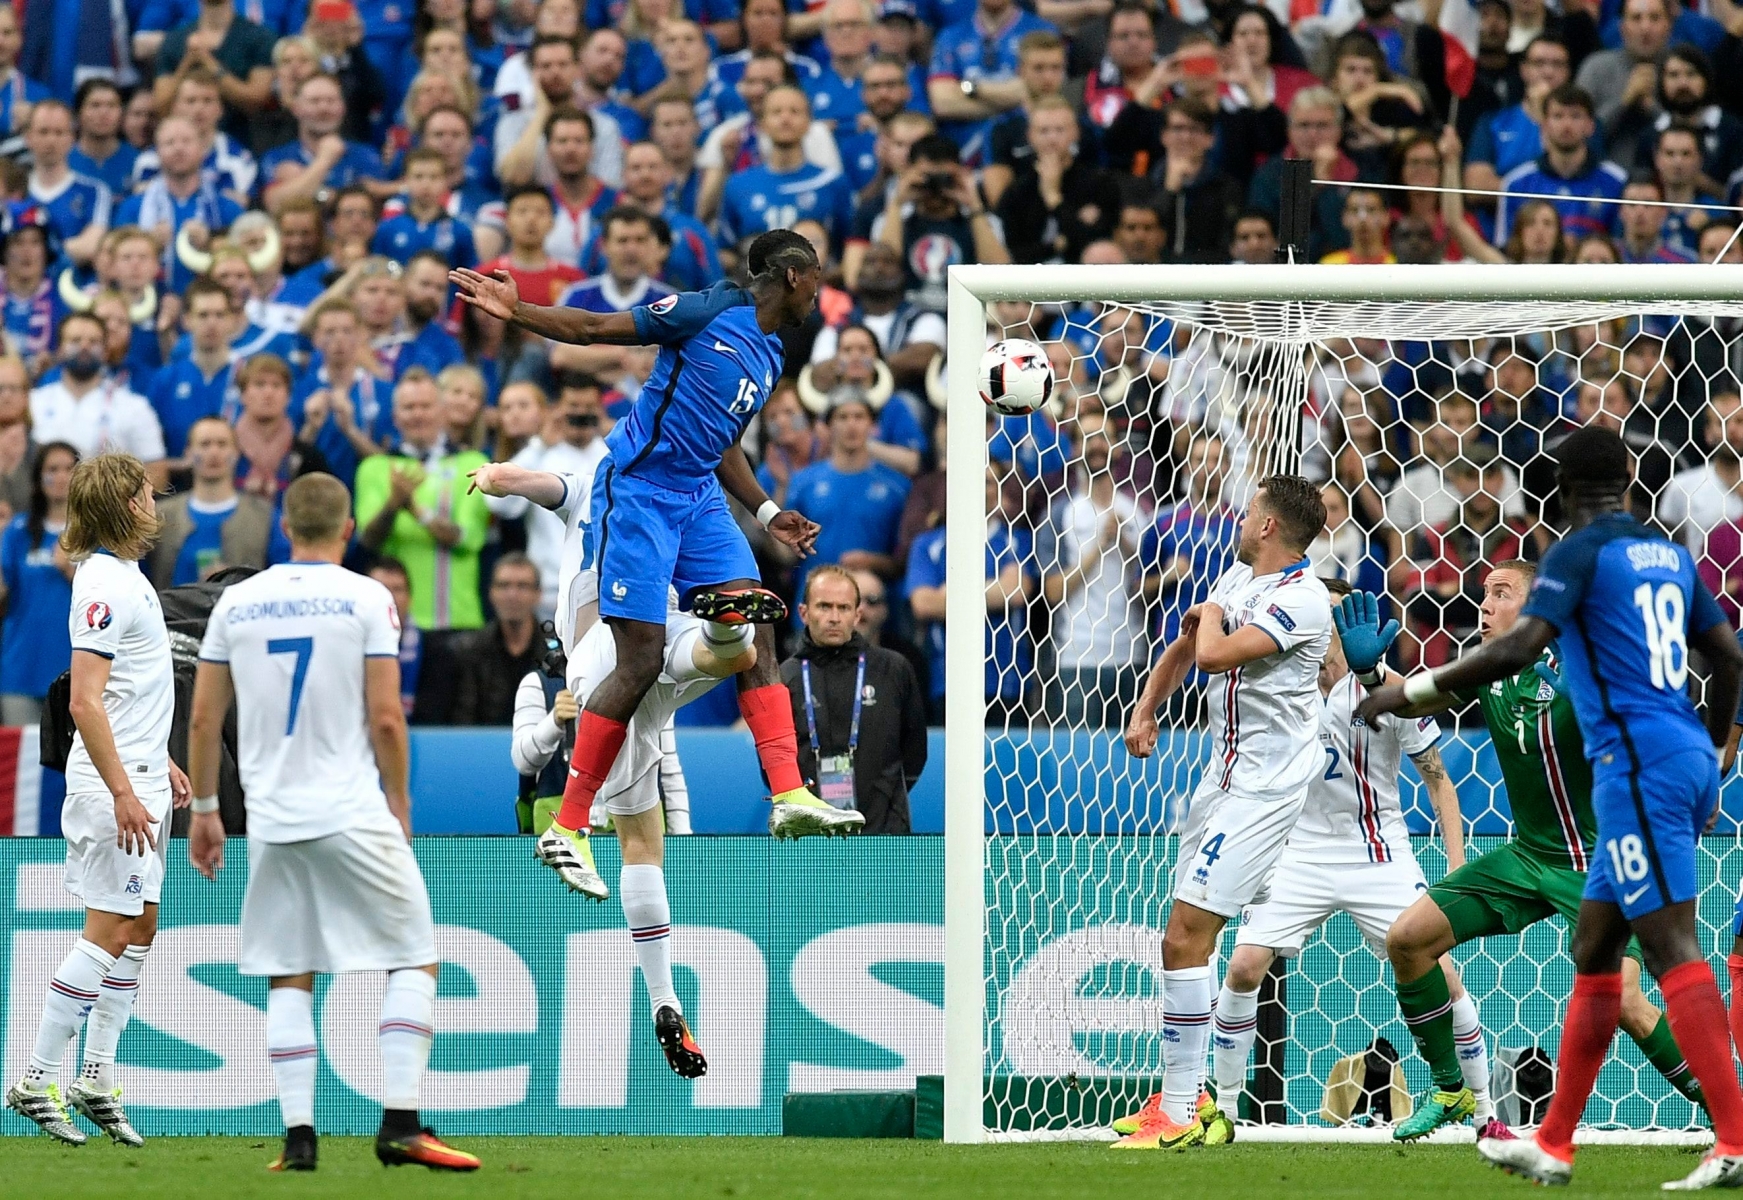 France's Paul Pogba, center, scores his sideís second goal during the Euro 2016 quarterfinal soccer match between France and Iceland, at the Stade de France in Saint-Denis, north of Paris, France, Sunday, July 3, 2016. (AP Photo/Martin Meissner) Soccer Euro 2016 France Iceland